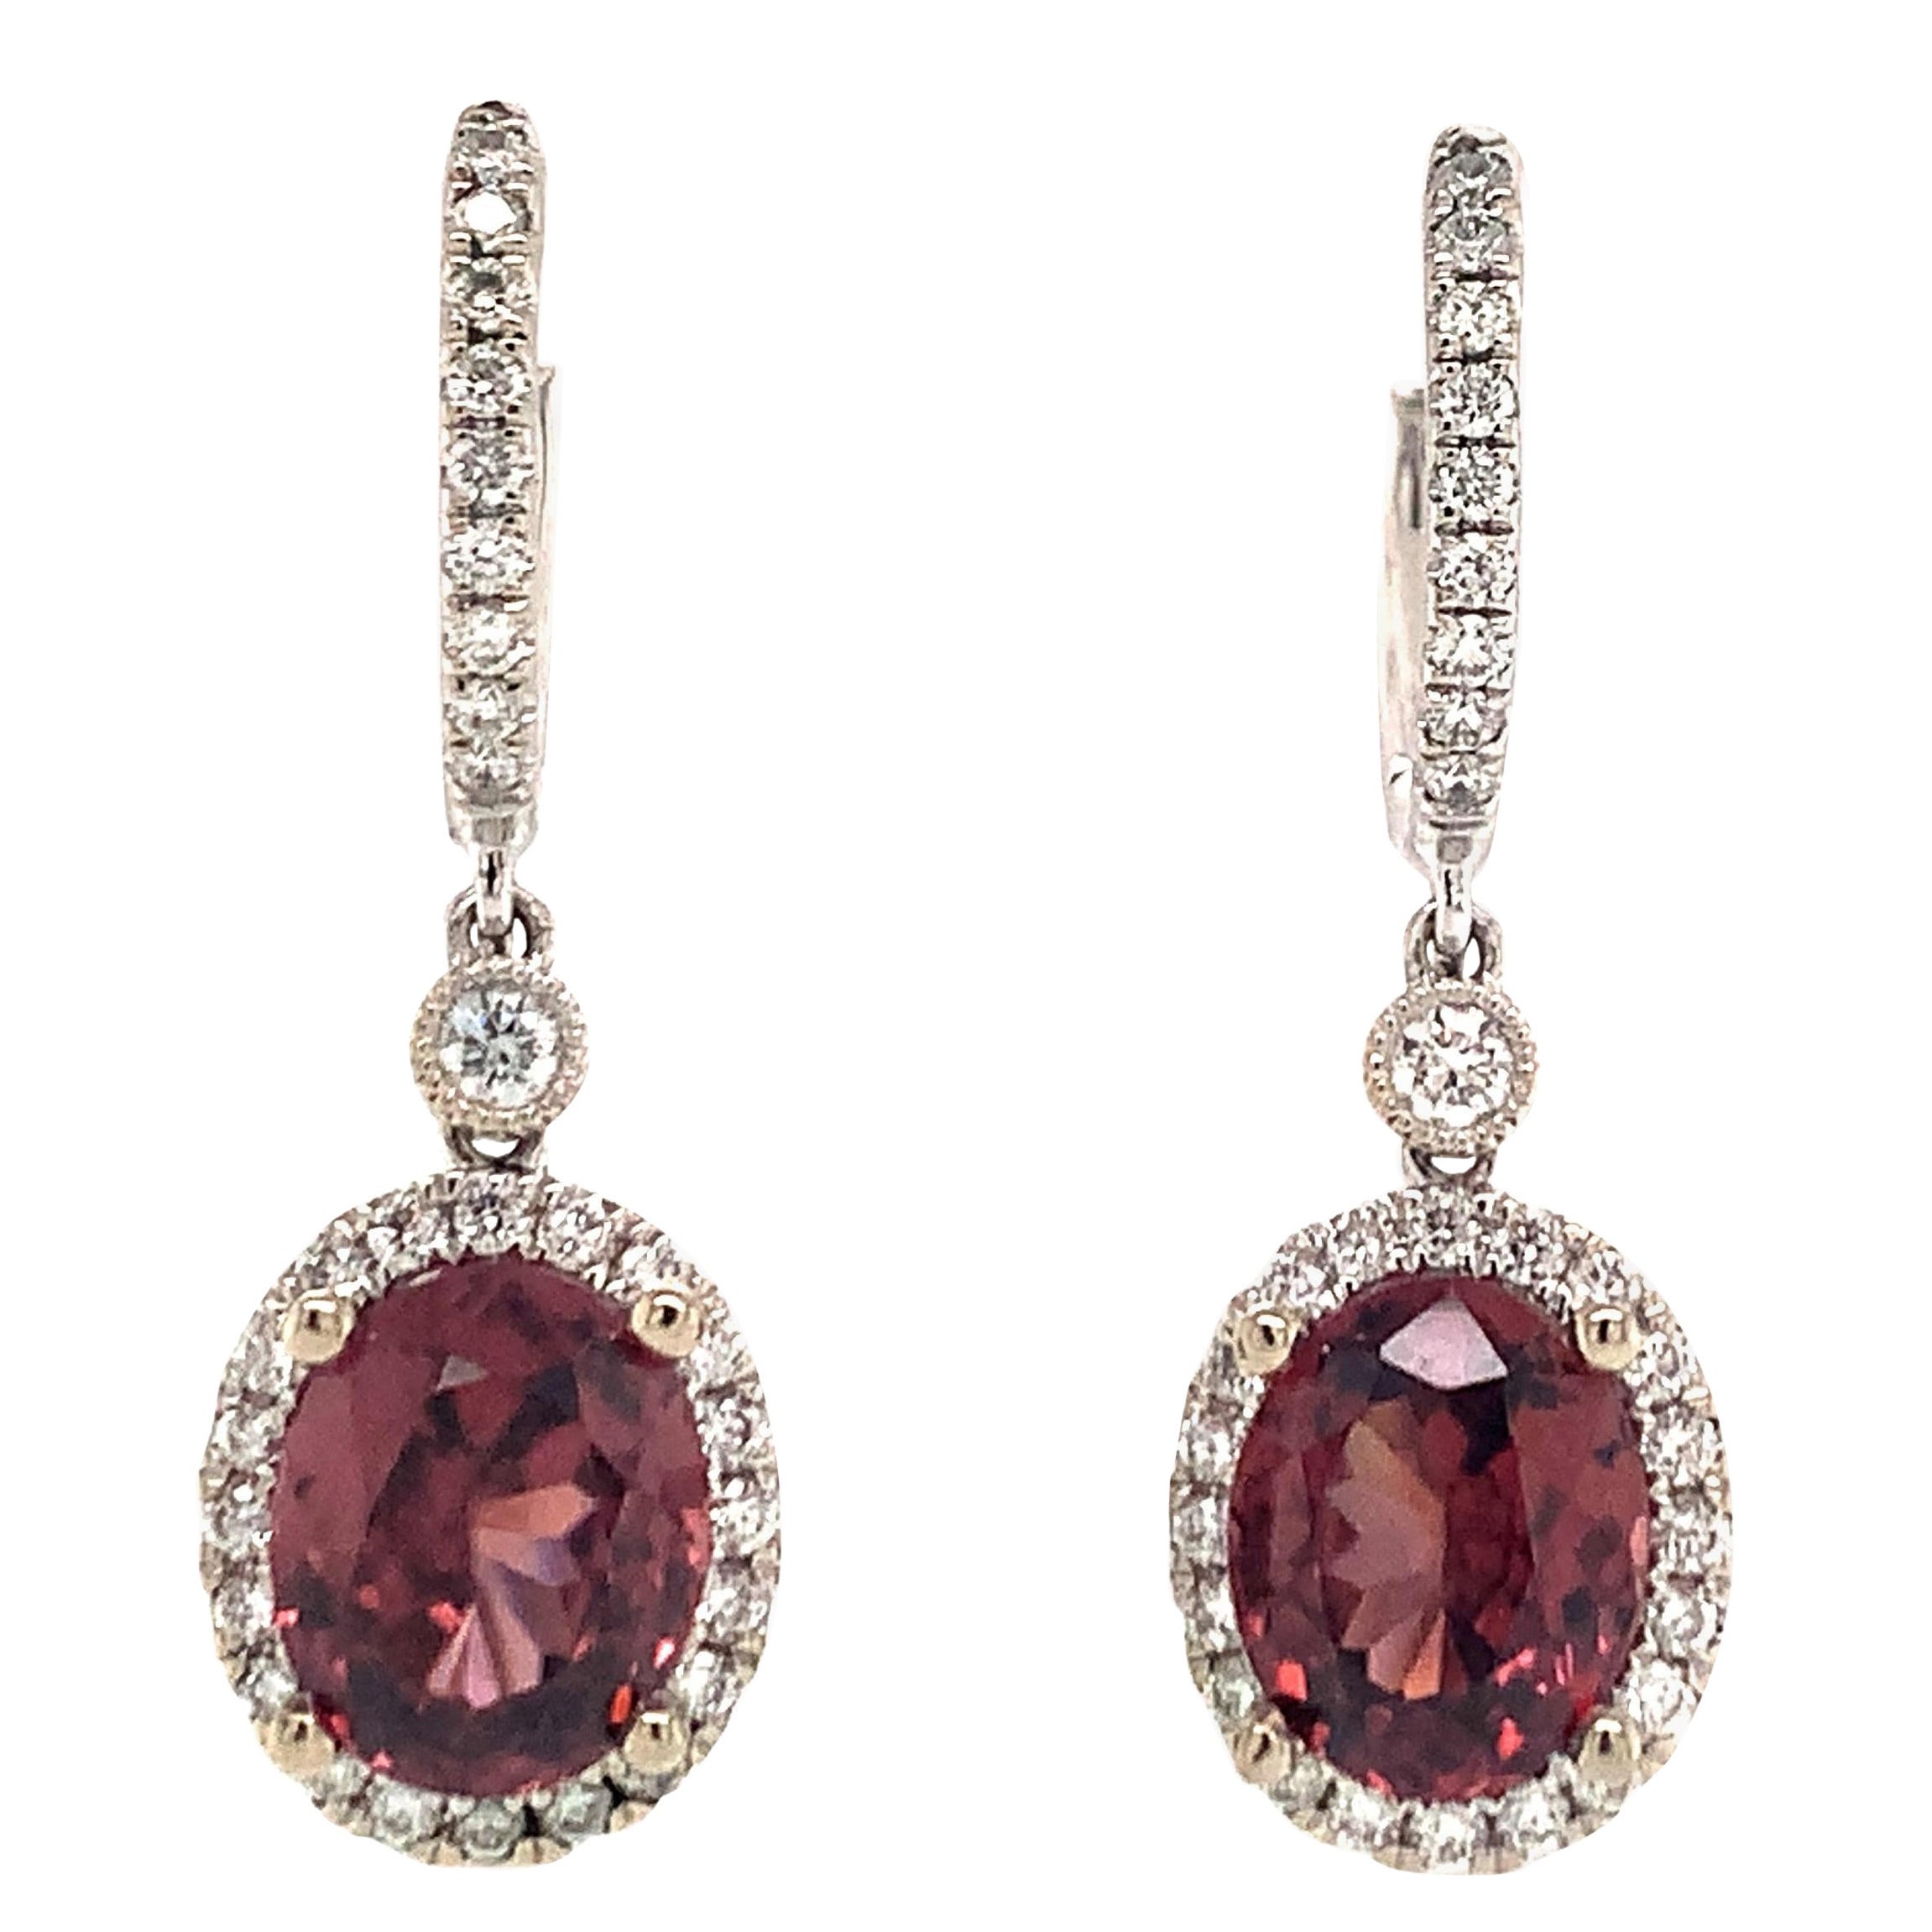 Natural Tourmaline Rubellite Diamond Earrings 18k Gold 6.62 TCW Certified For Sale